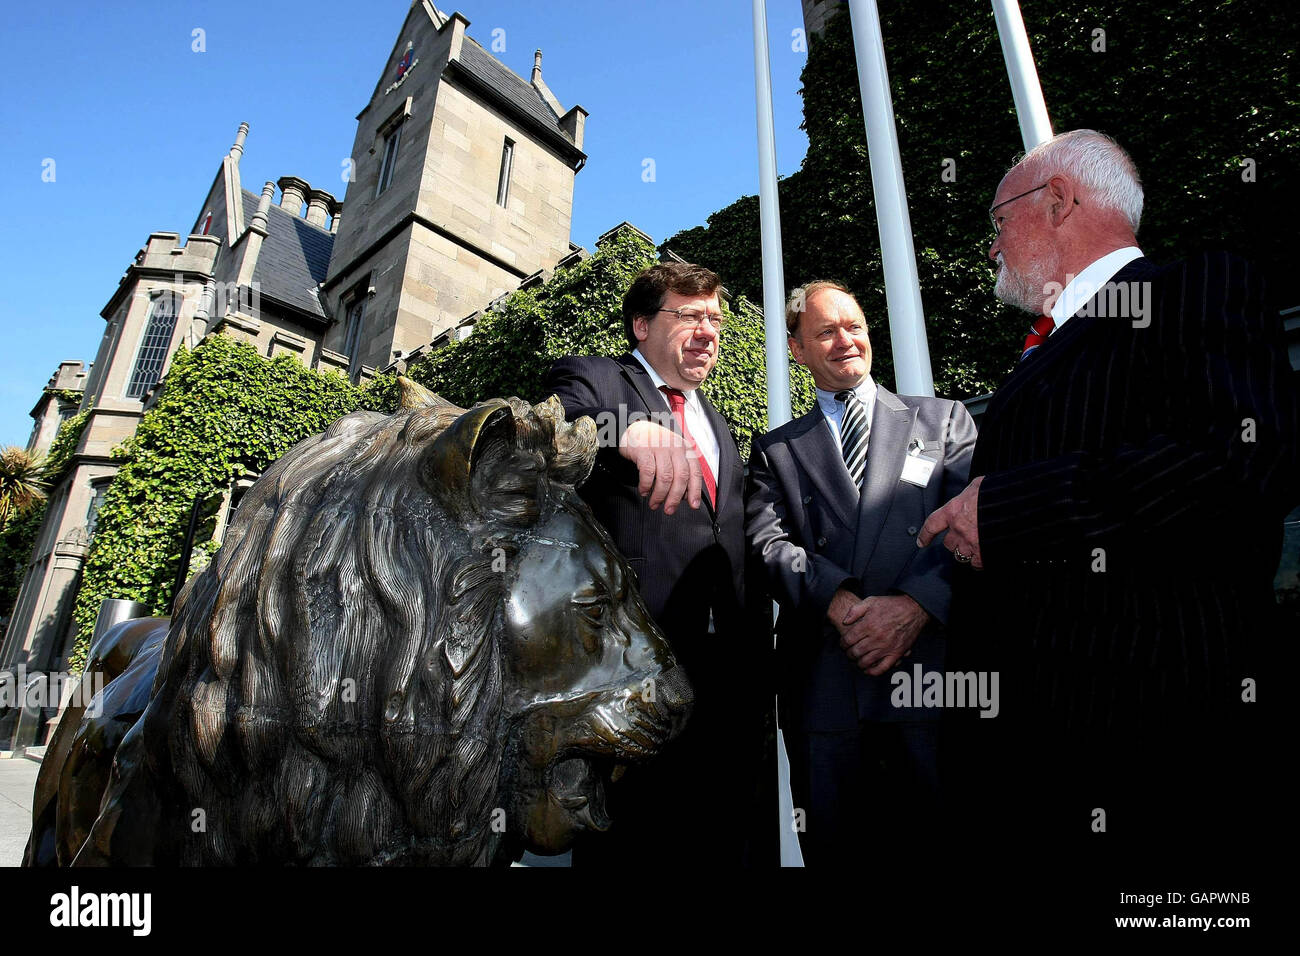 Taoiseach Brian Cowen (left) with D.I.F. Lucey, President of the IPA and John Cullen, Director General of the IPA, before addressing the Institute of Public Administration's national conference on the topic of: 'A Public Service for the Future? The OECD Challenge', in Clontarf Castle, Dublin. Stock Photo